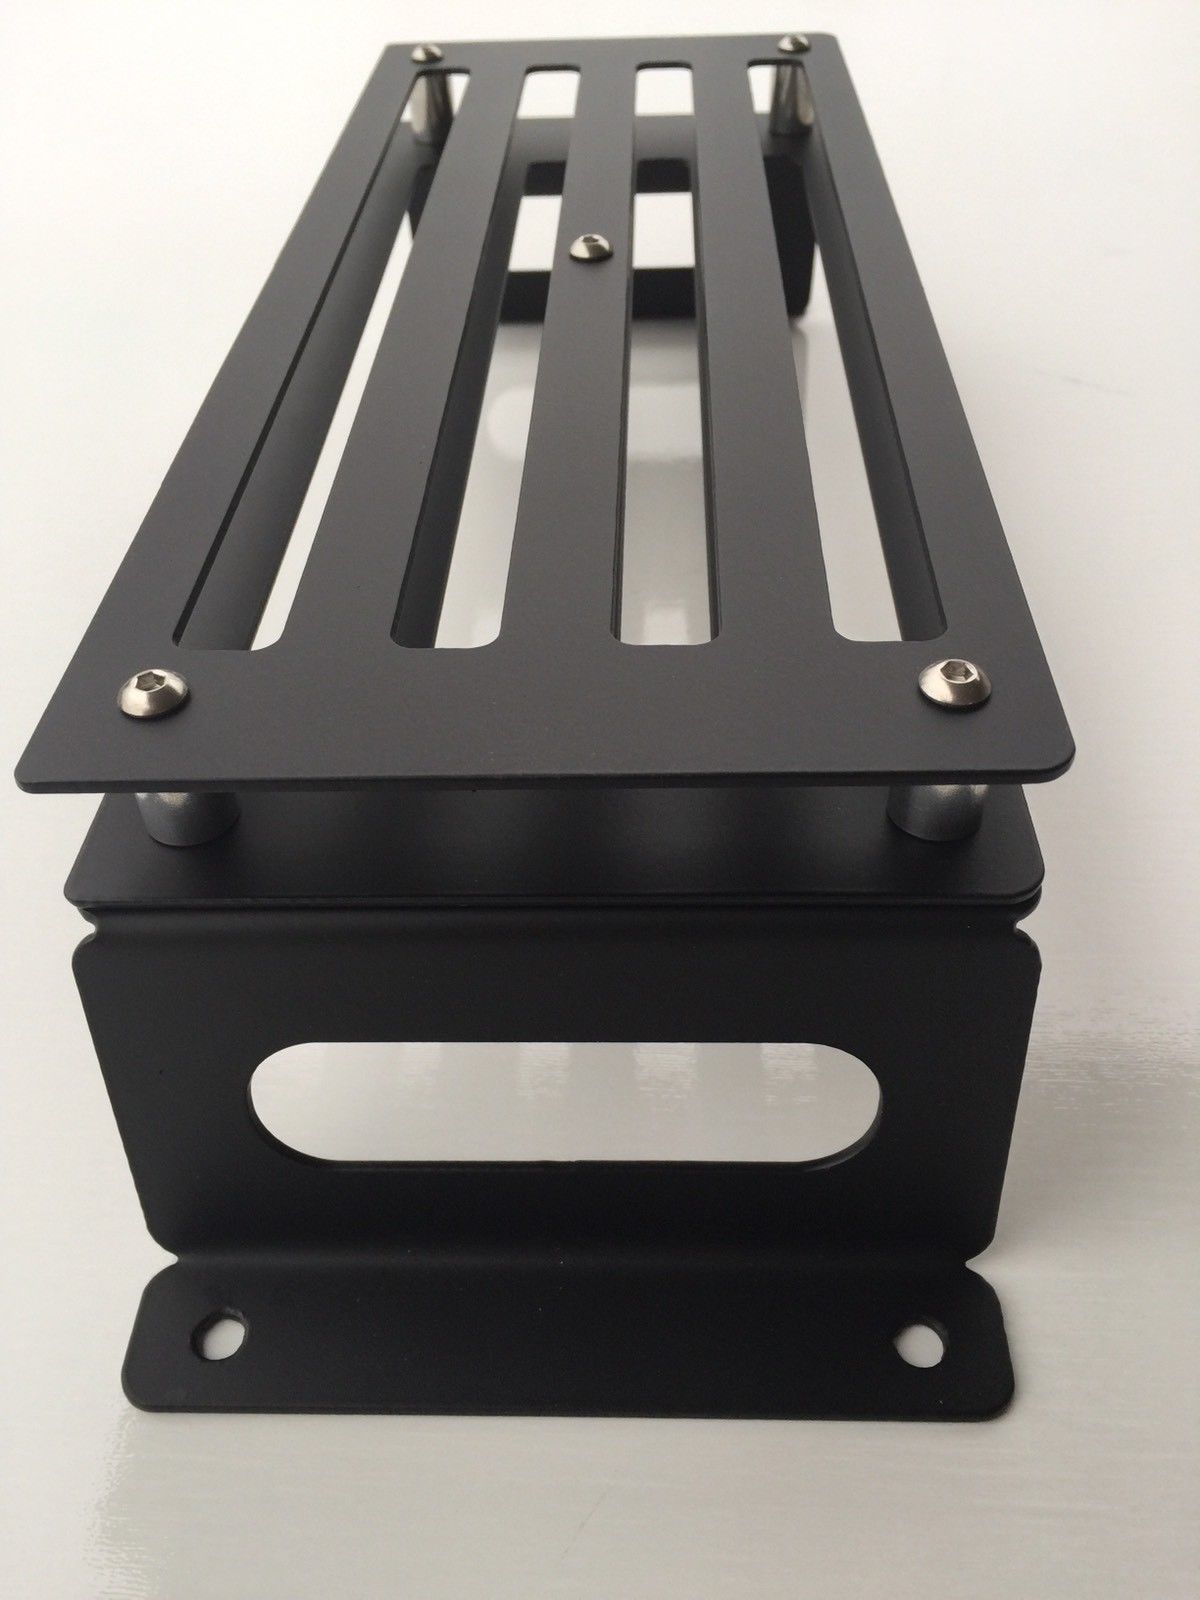 Dillon Casefeed Plate Bench Mounted Storage Rack Stand XL650 RL550 Super 1050 